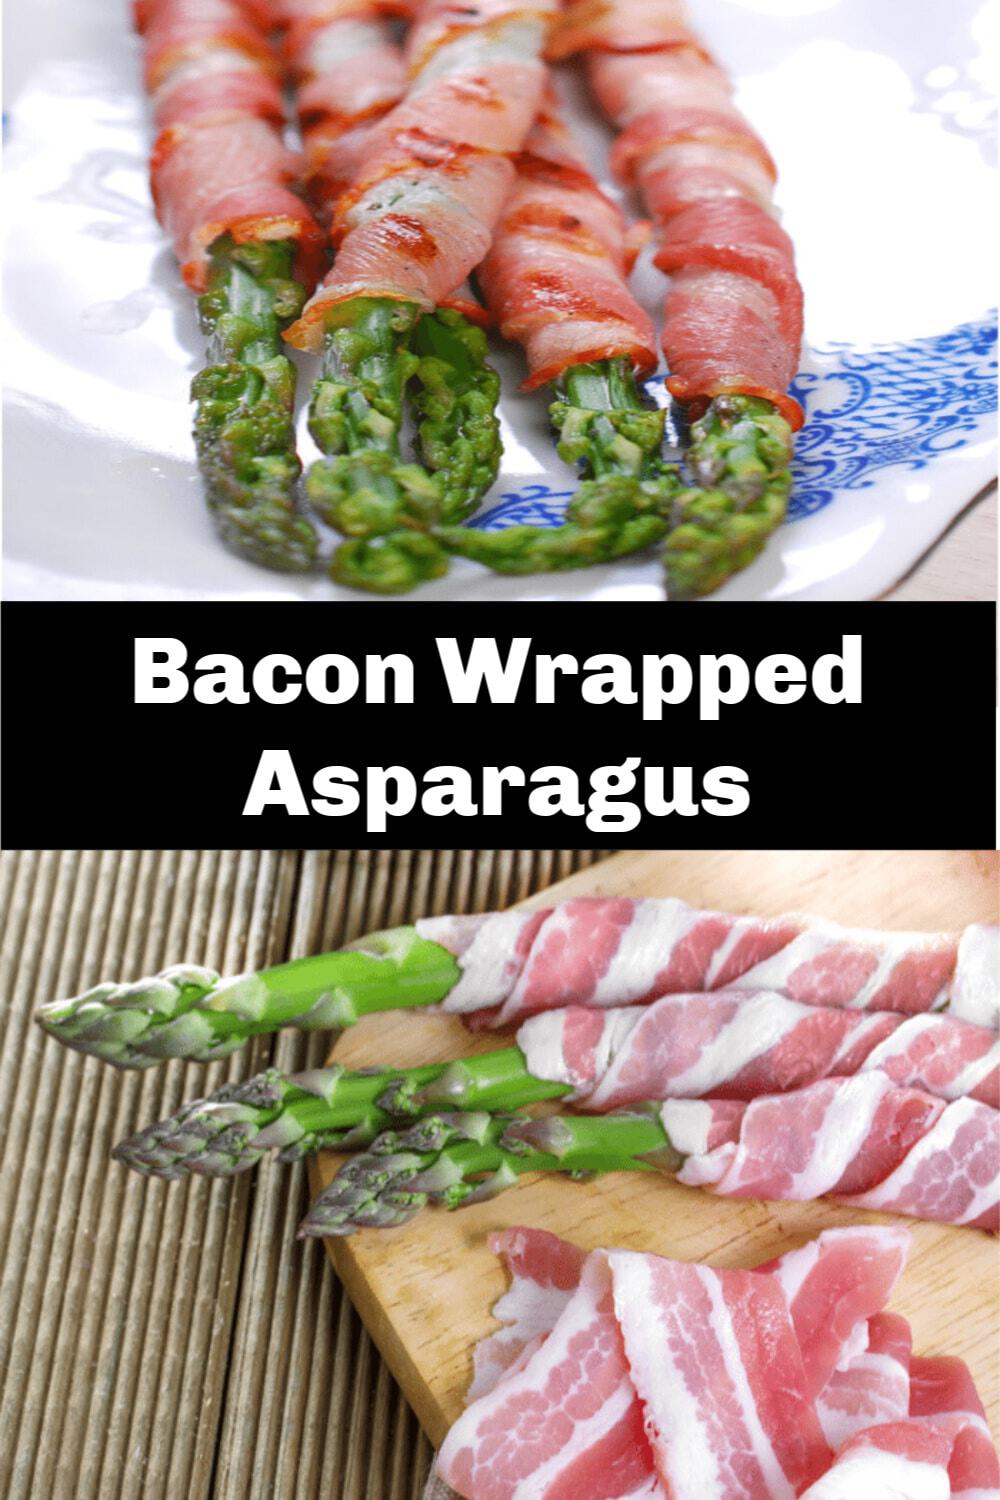 How to make Bacon Wrapped Asparagus